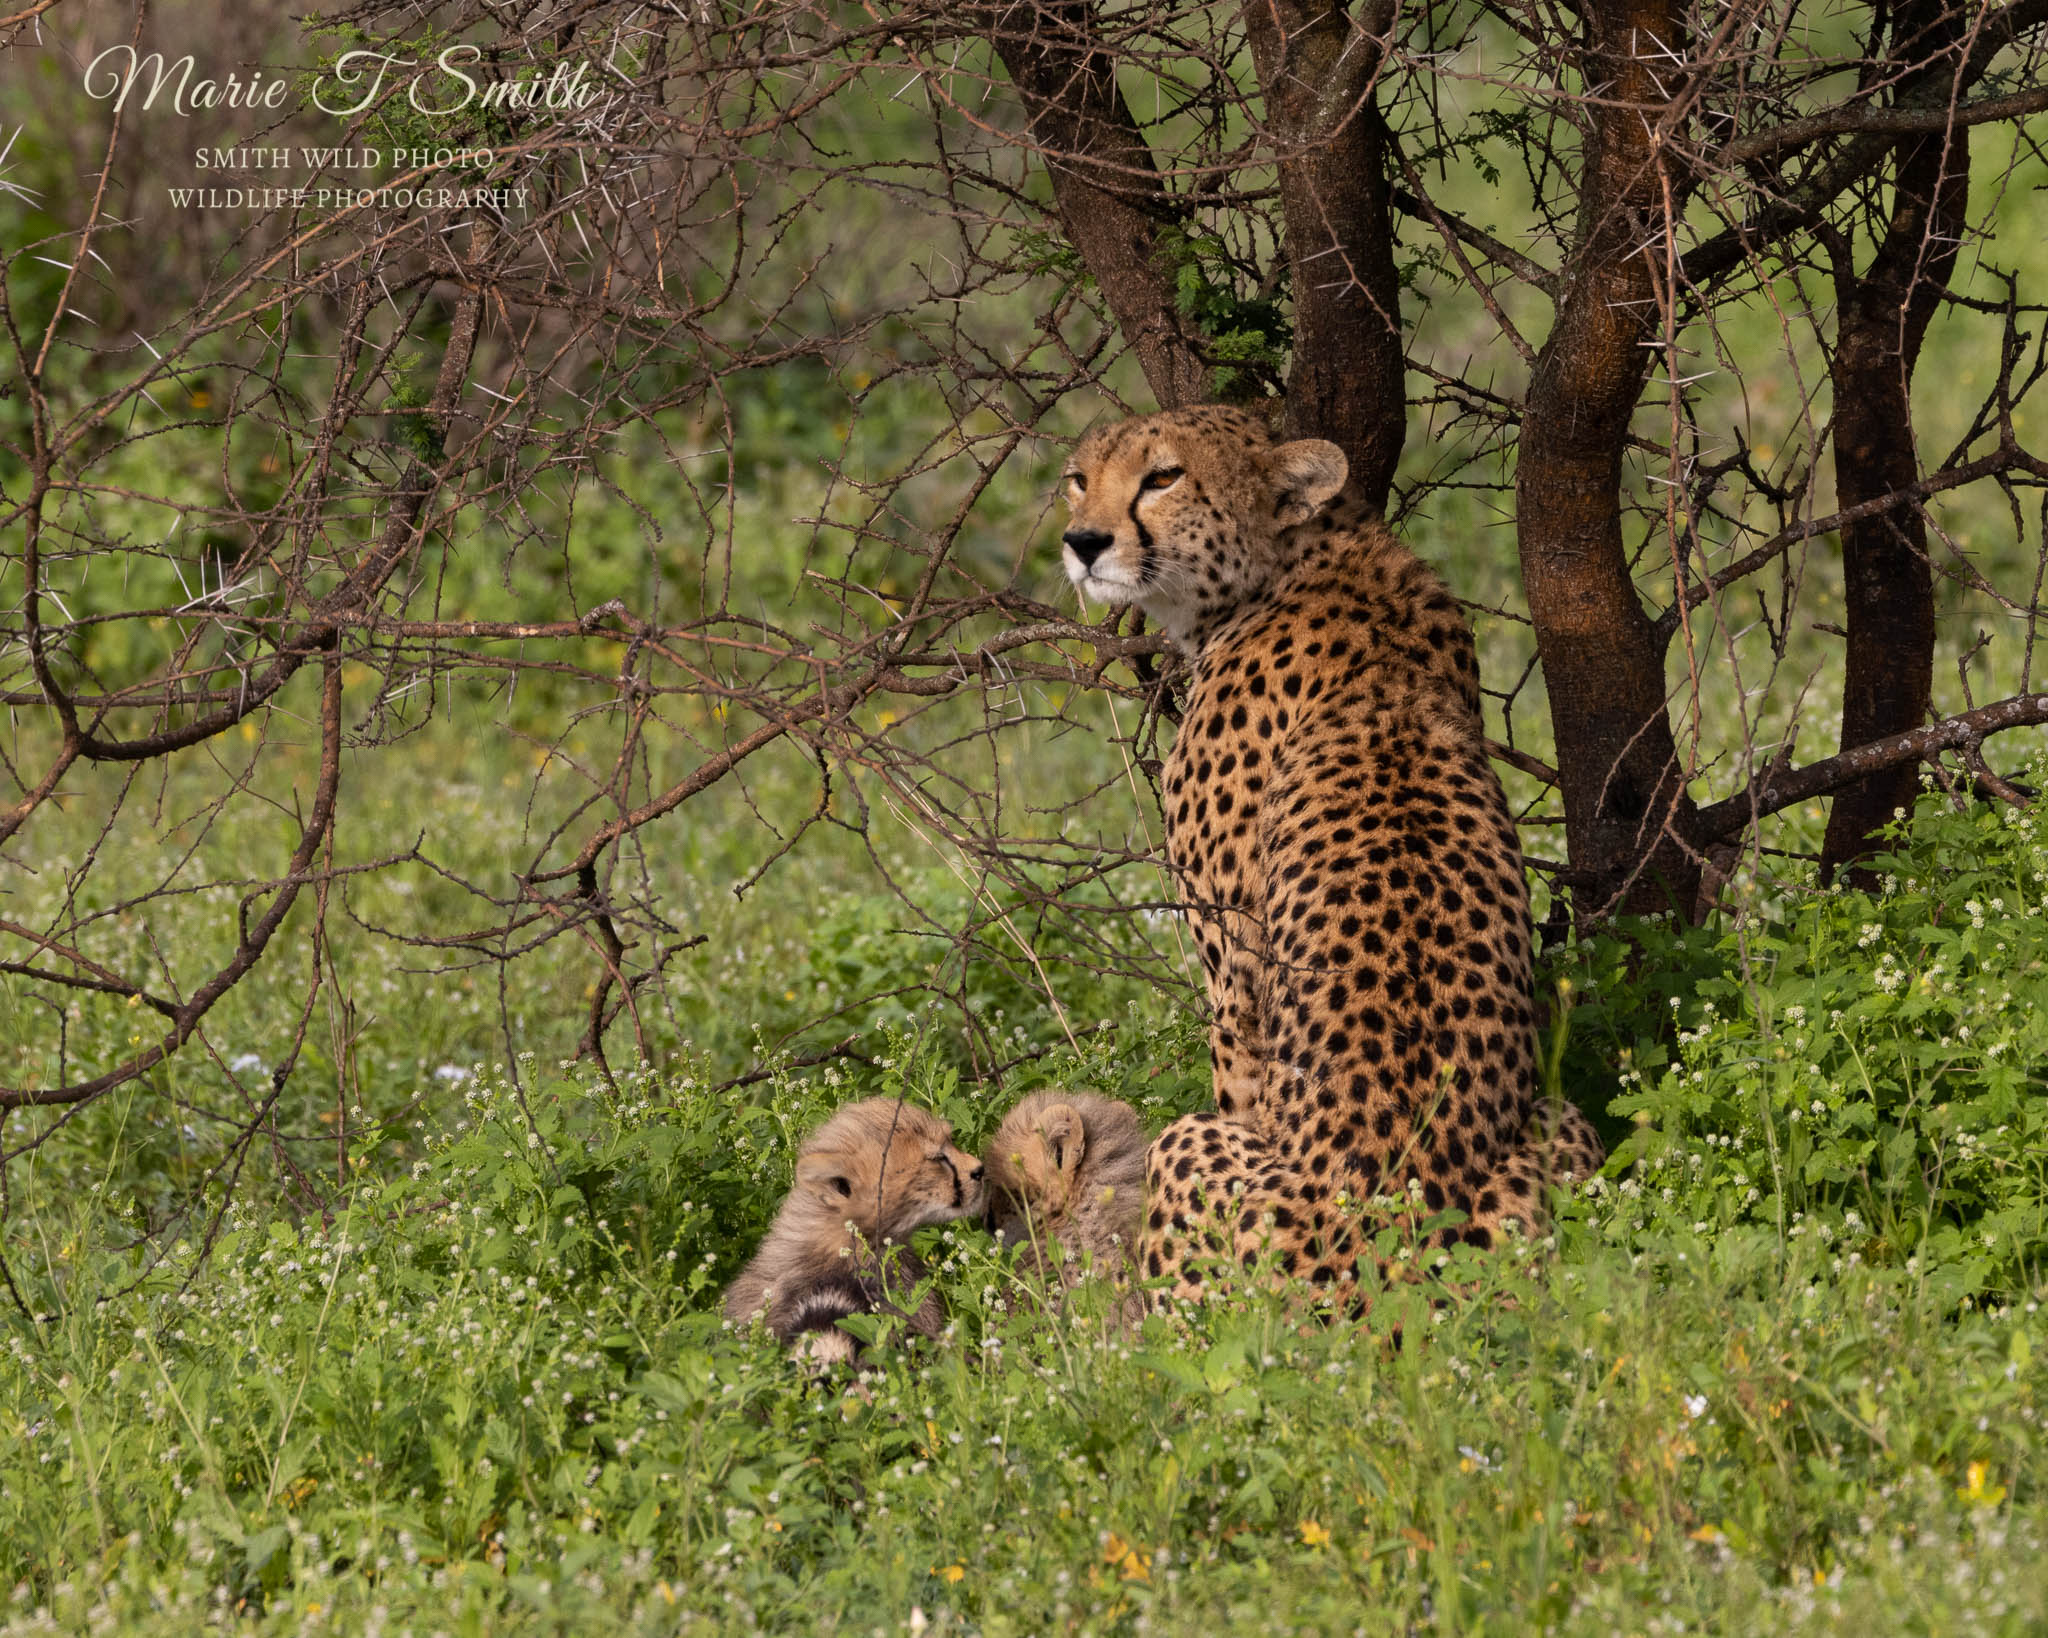 leopard and two cubs in Africa sat in grass against trees